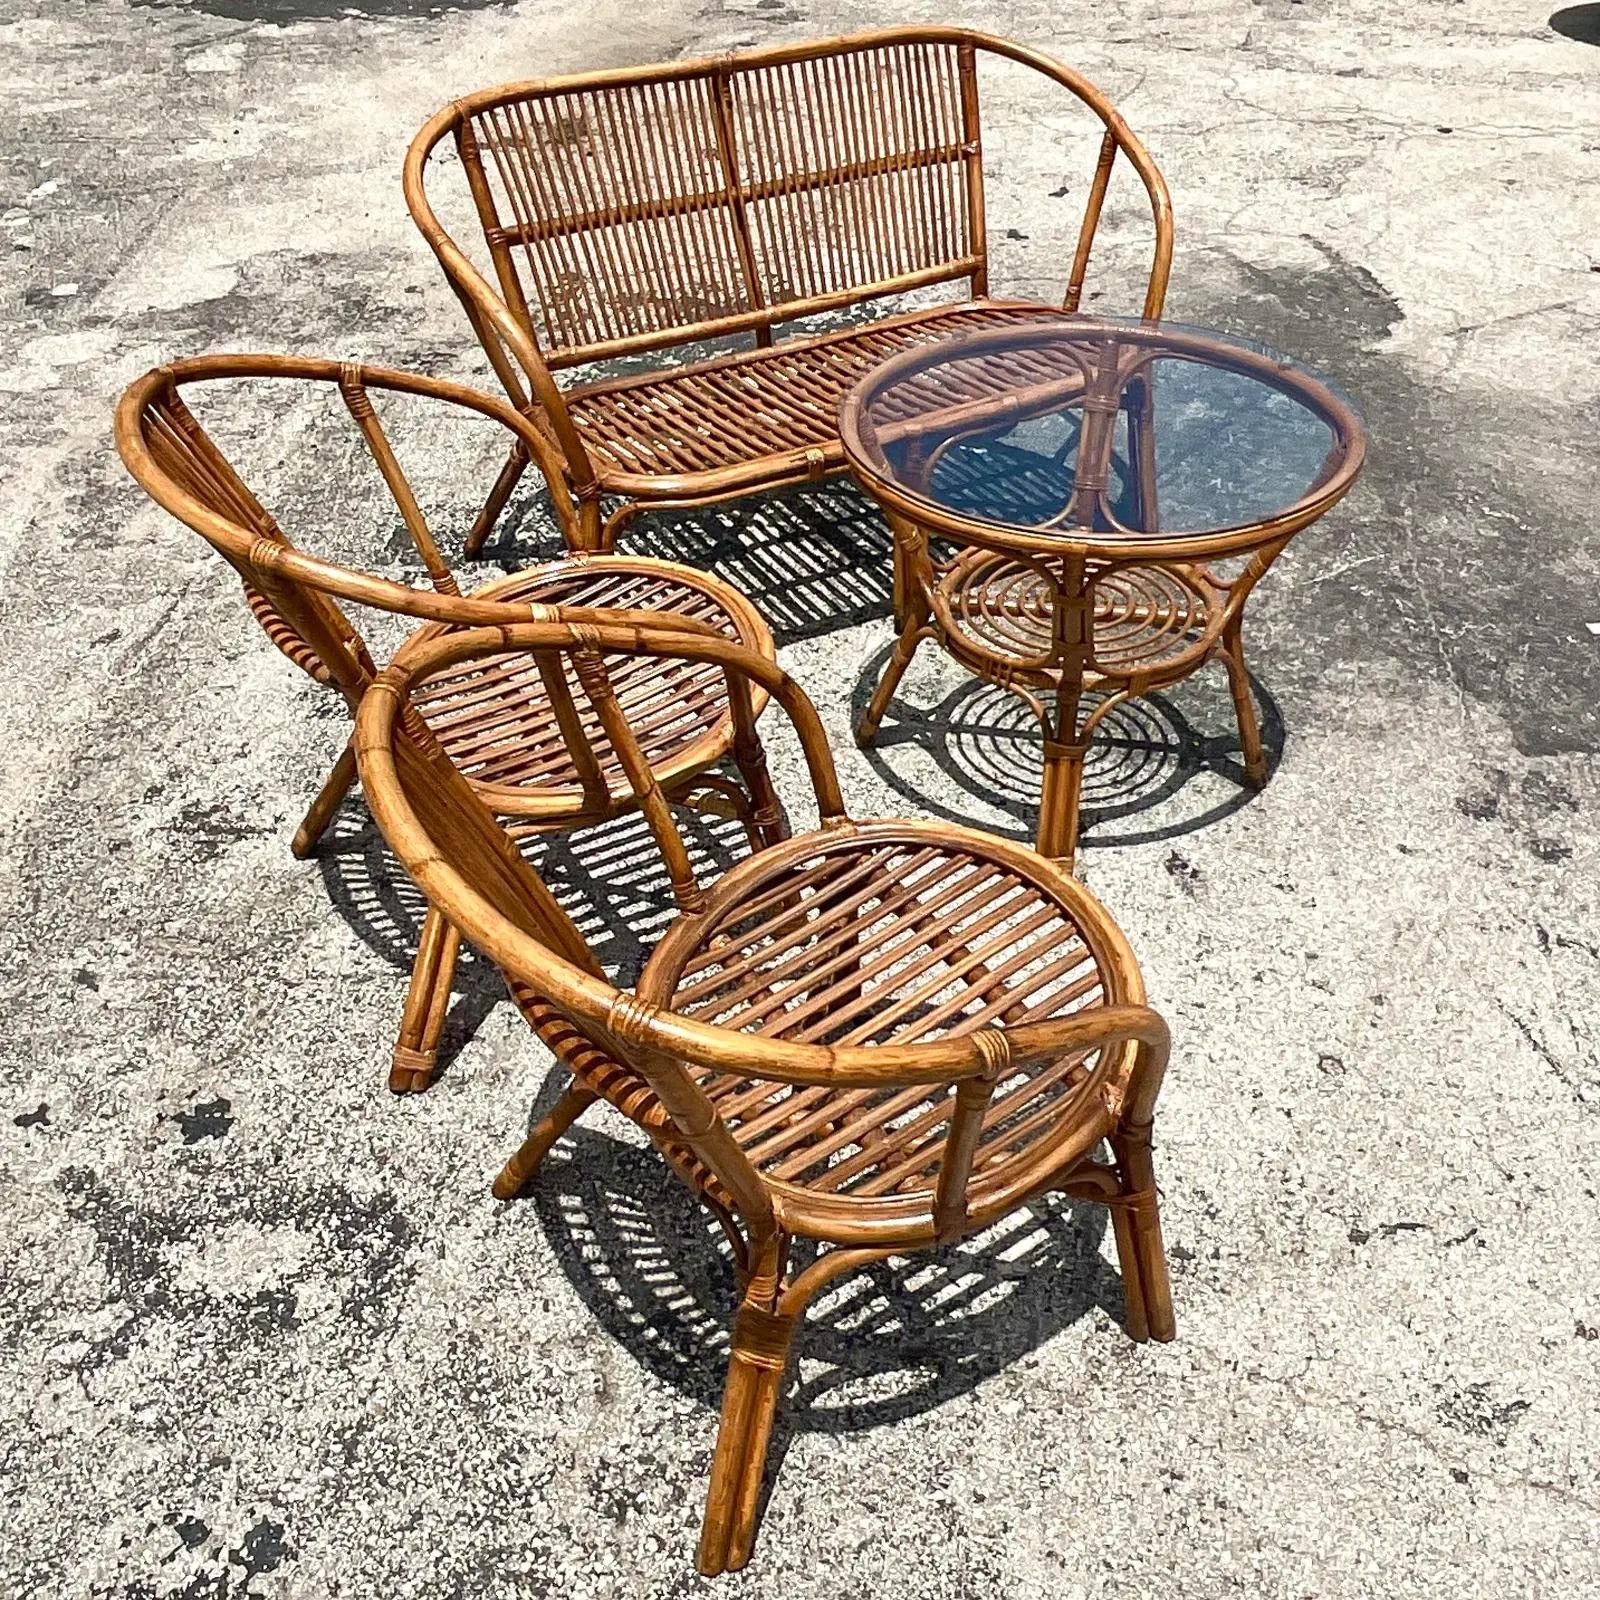 Fantastic Coastal seating set. Beautiful stick rattan set that includes a loveseat, two chairs and a coffee table. Acquired from a Palm Beach estate.

Chair dimensions- 25.25 x 18.5 x 28.75 x 14.5
Table 26 x 26 x 22.